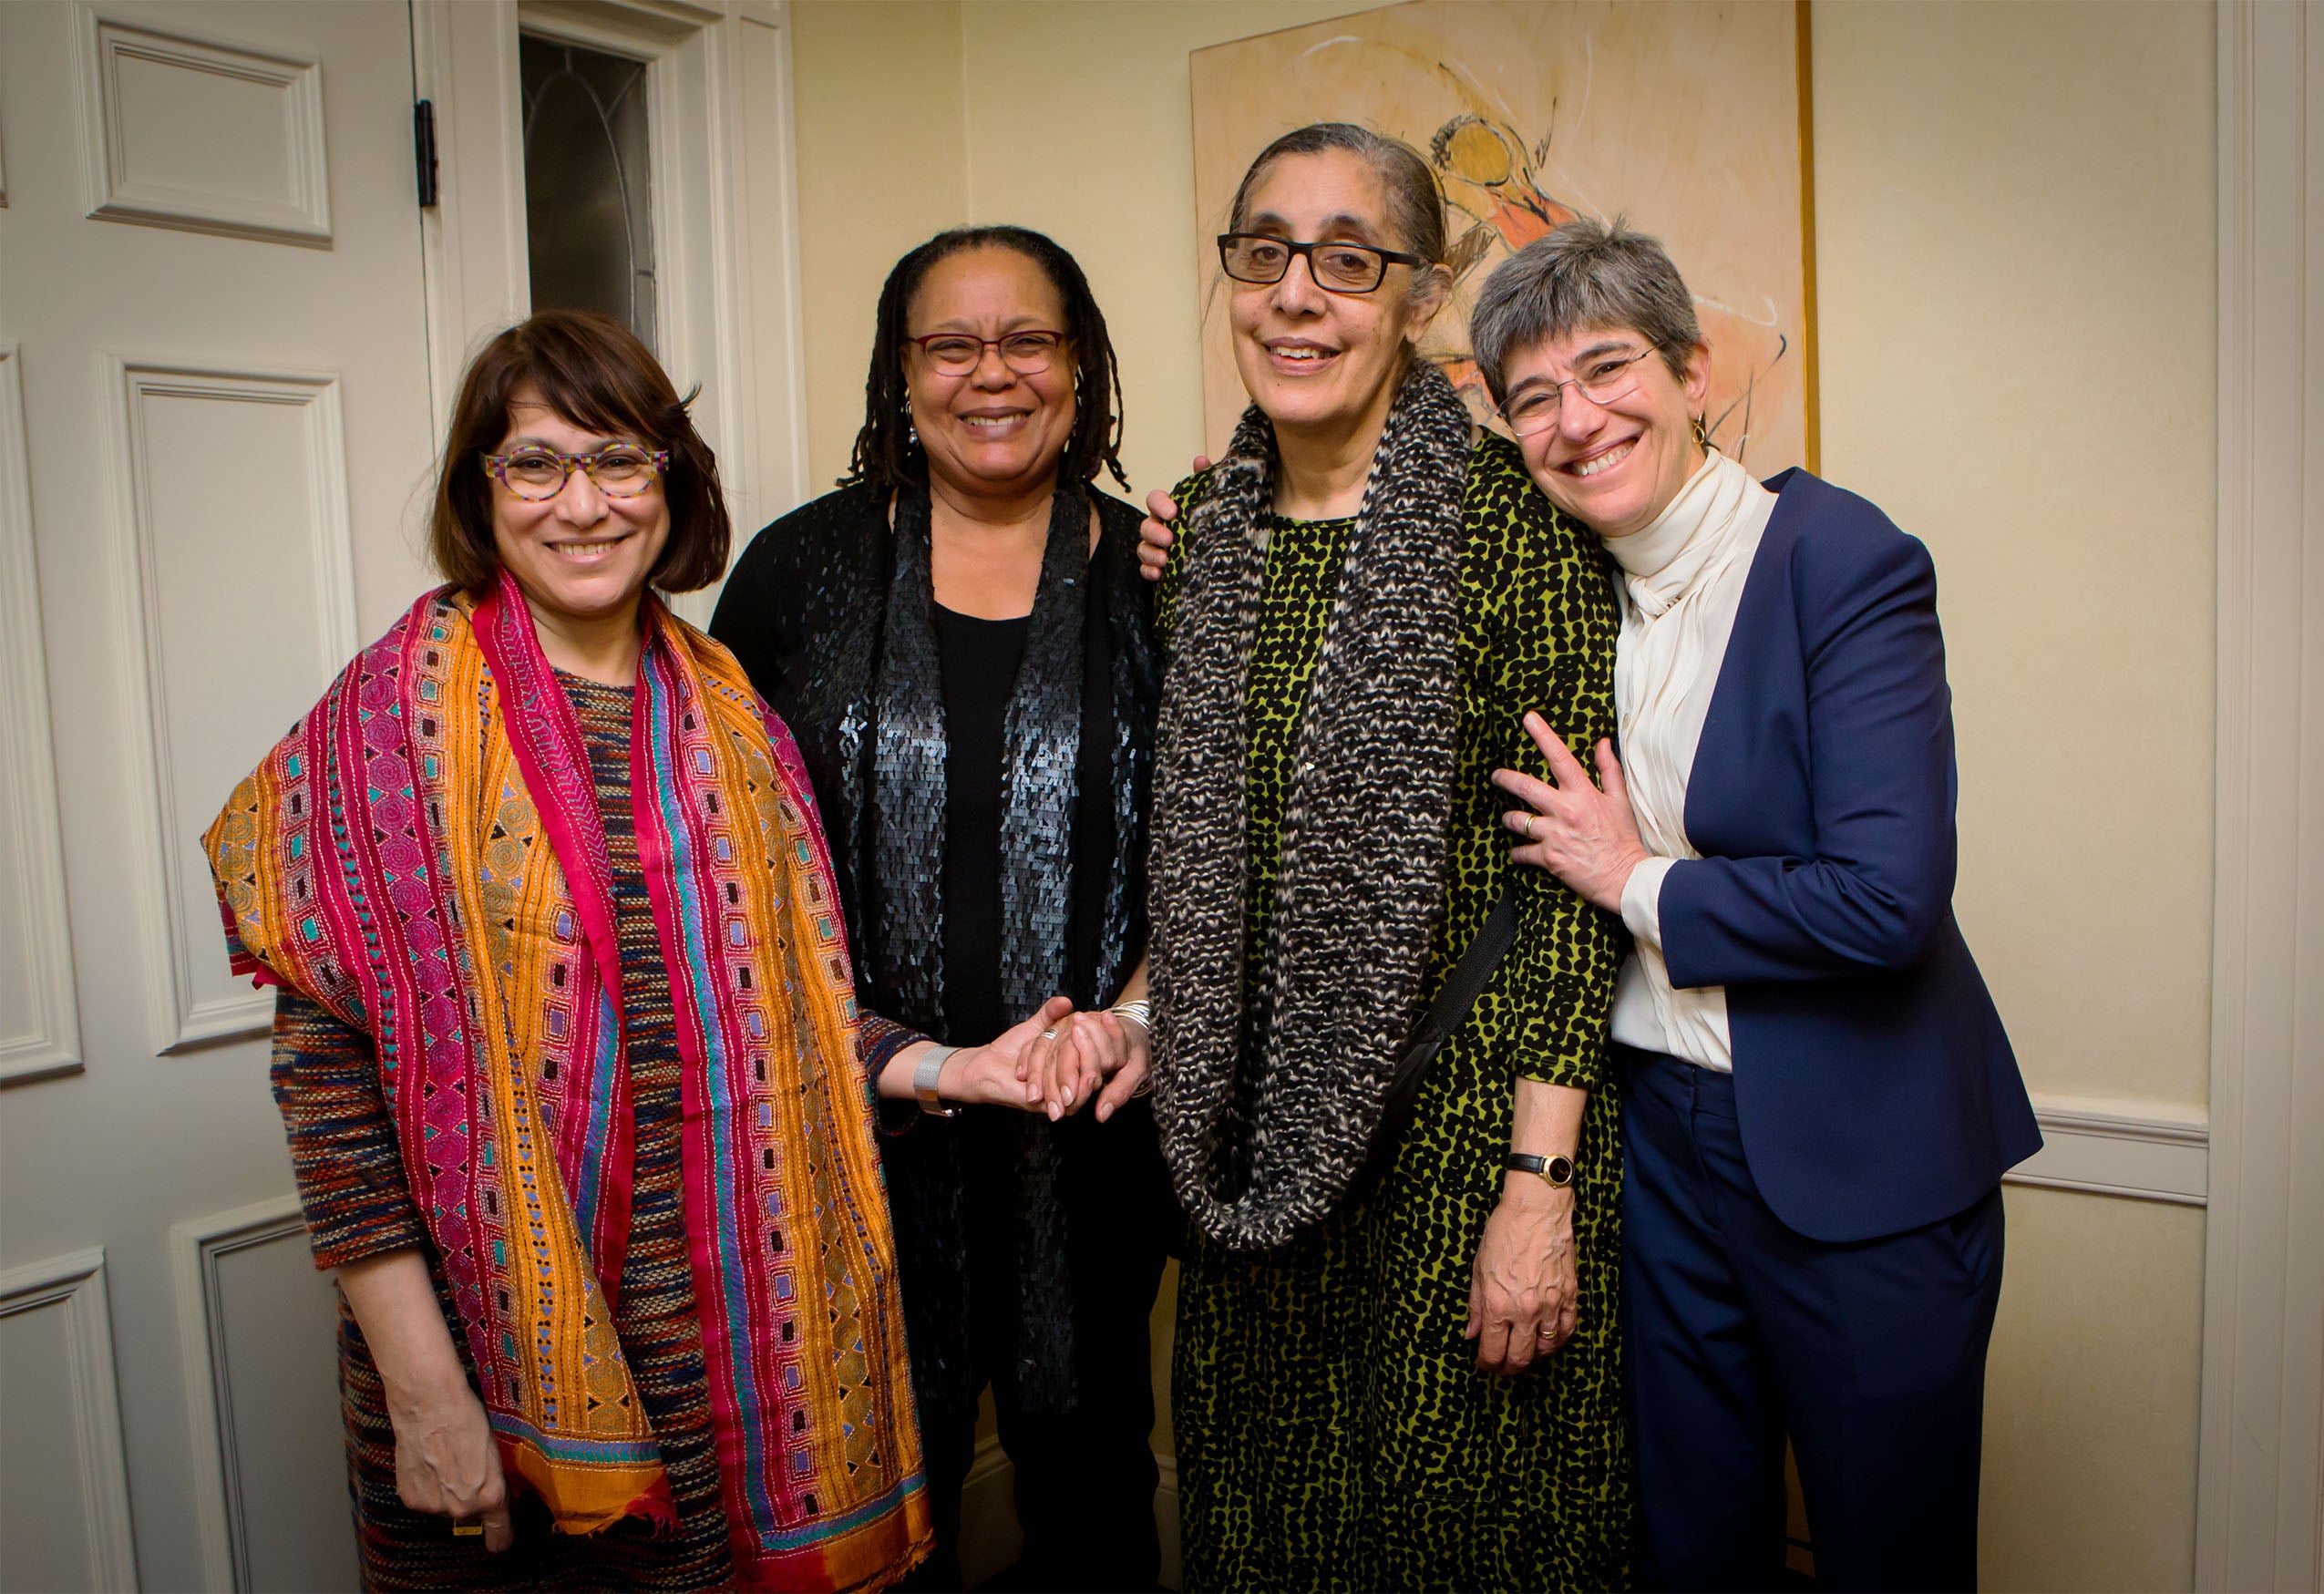 Lani Guinier with three others at a 2018 tribute event.